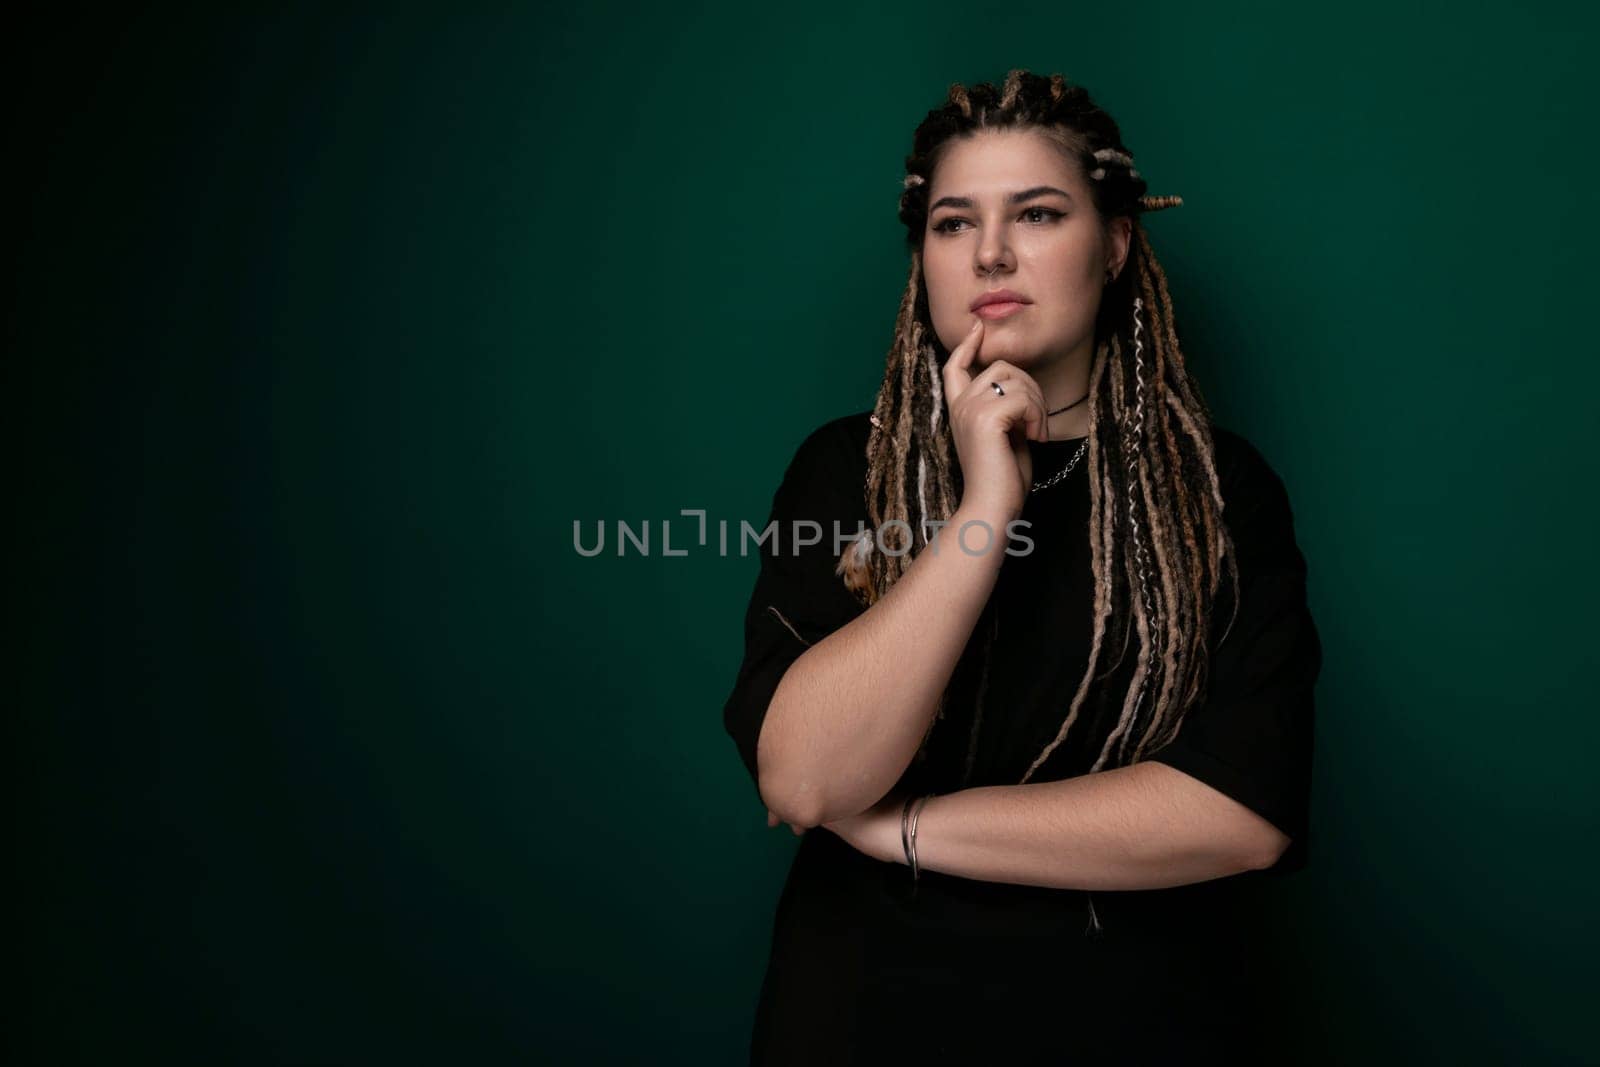 A woman with dreadlocks is standing in front of a green wall. She is looking directly at the camera, appearing confident and composed.